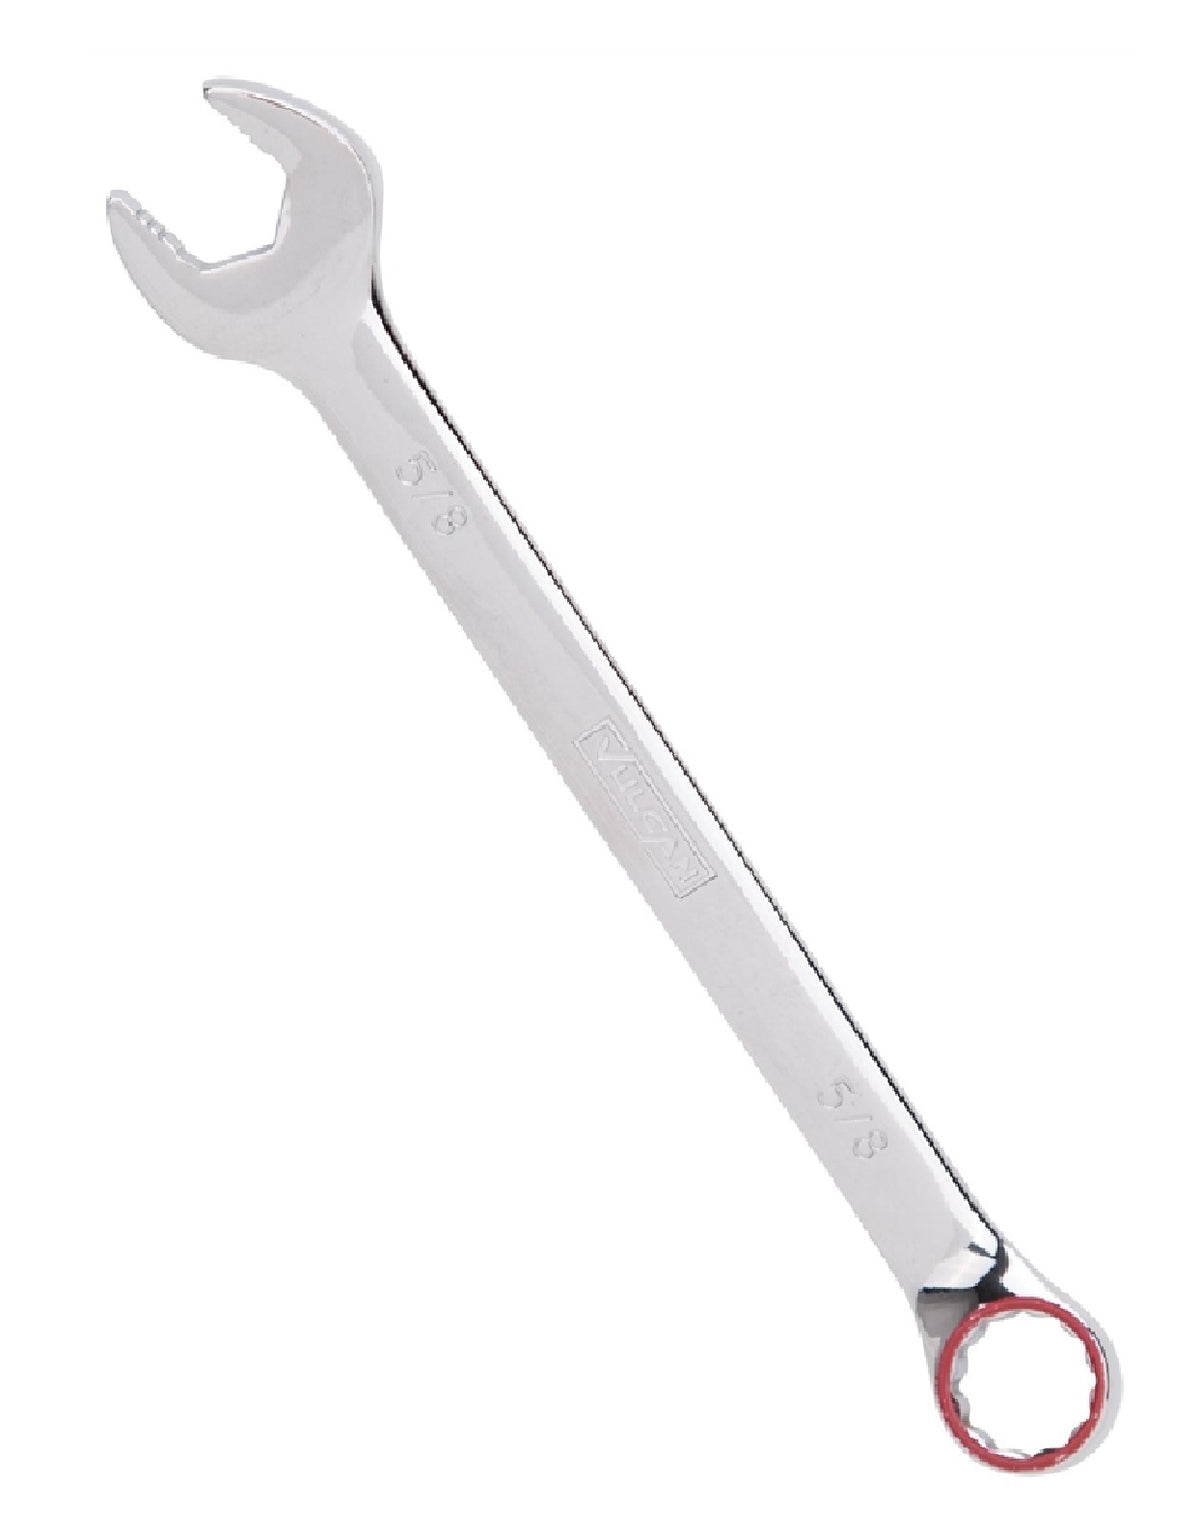 Vulcan MT6545719 Combination Wrench, 5/8 Inch